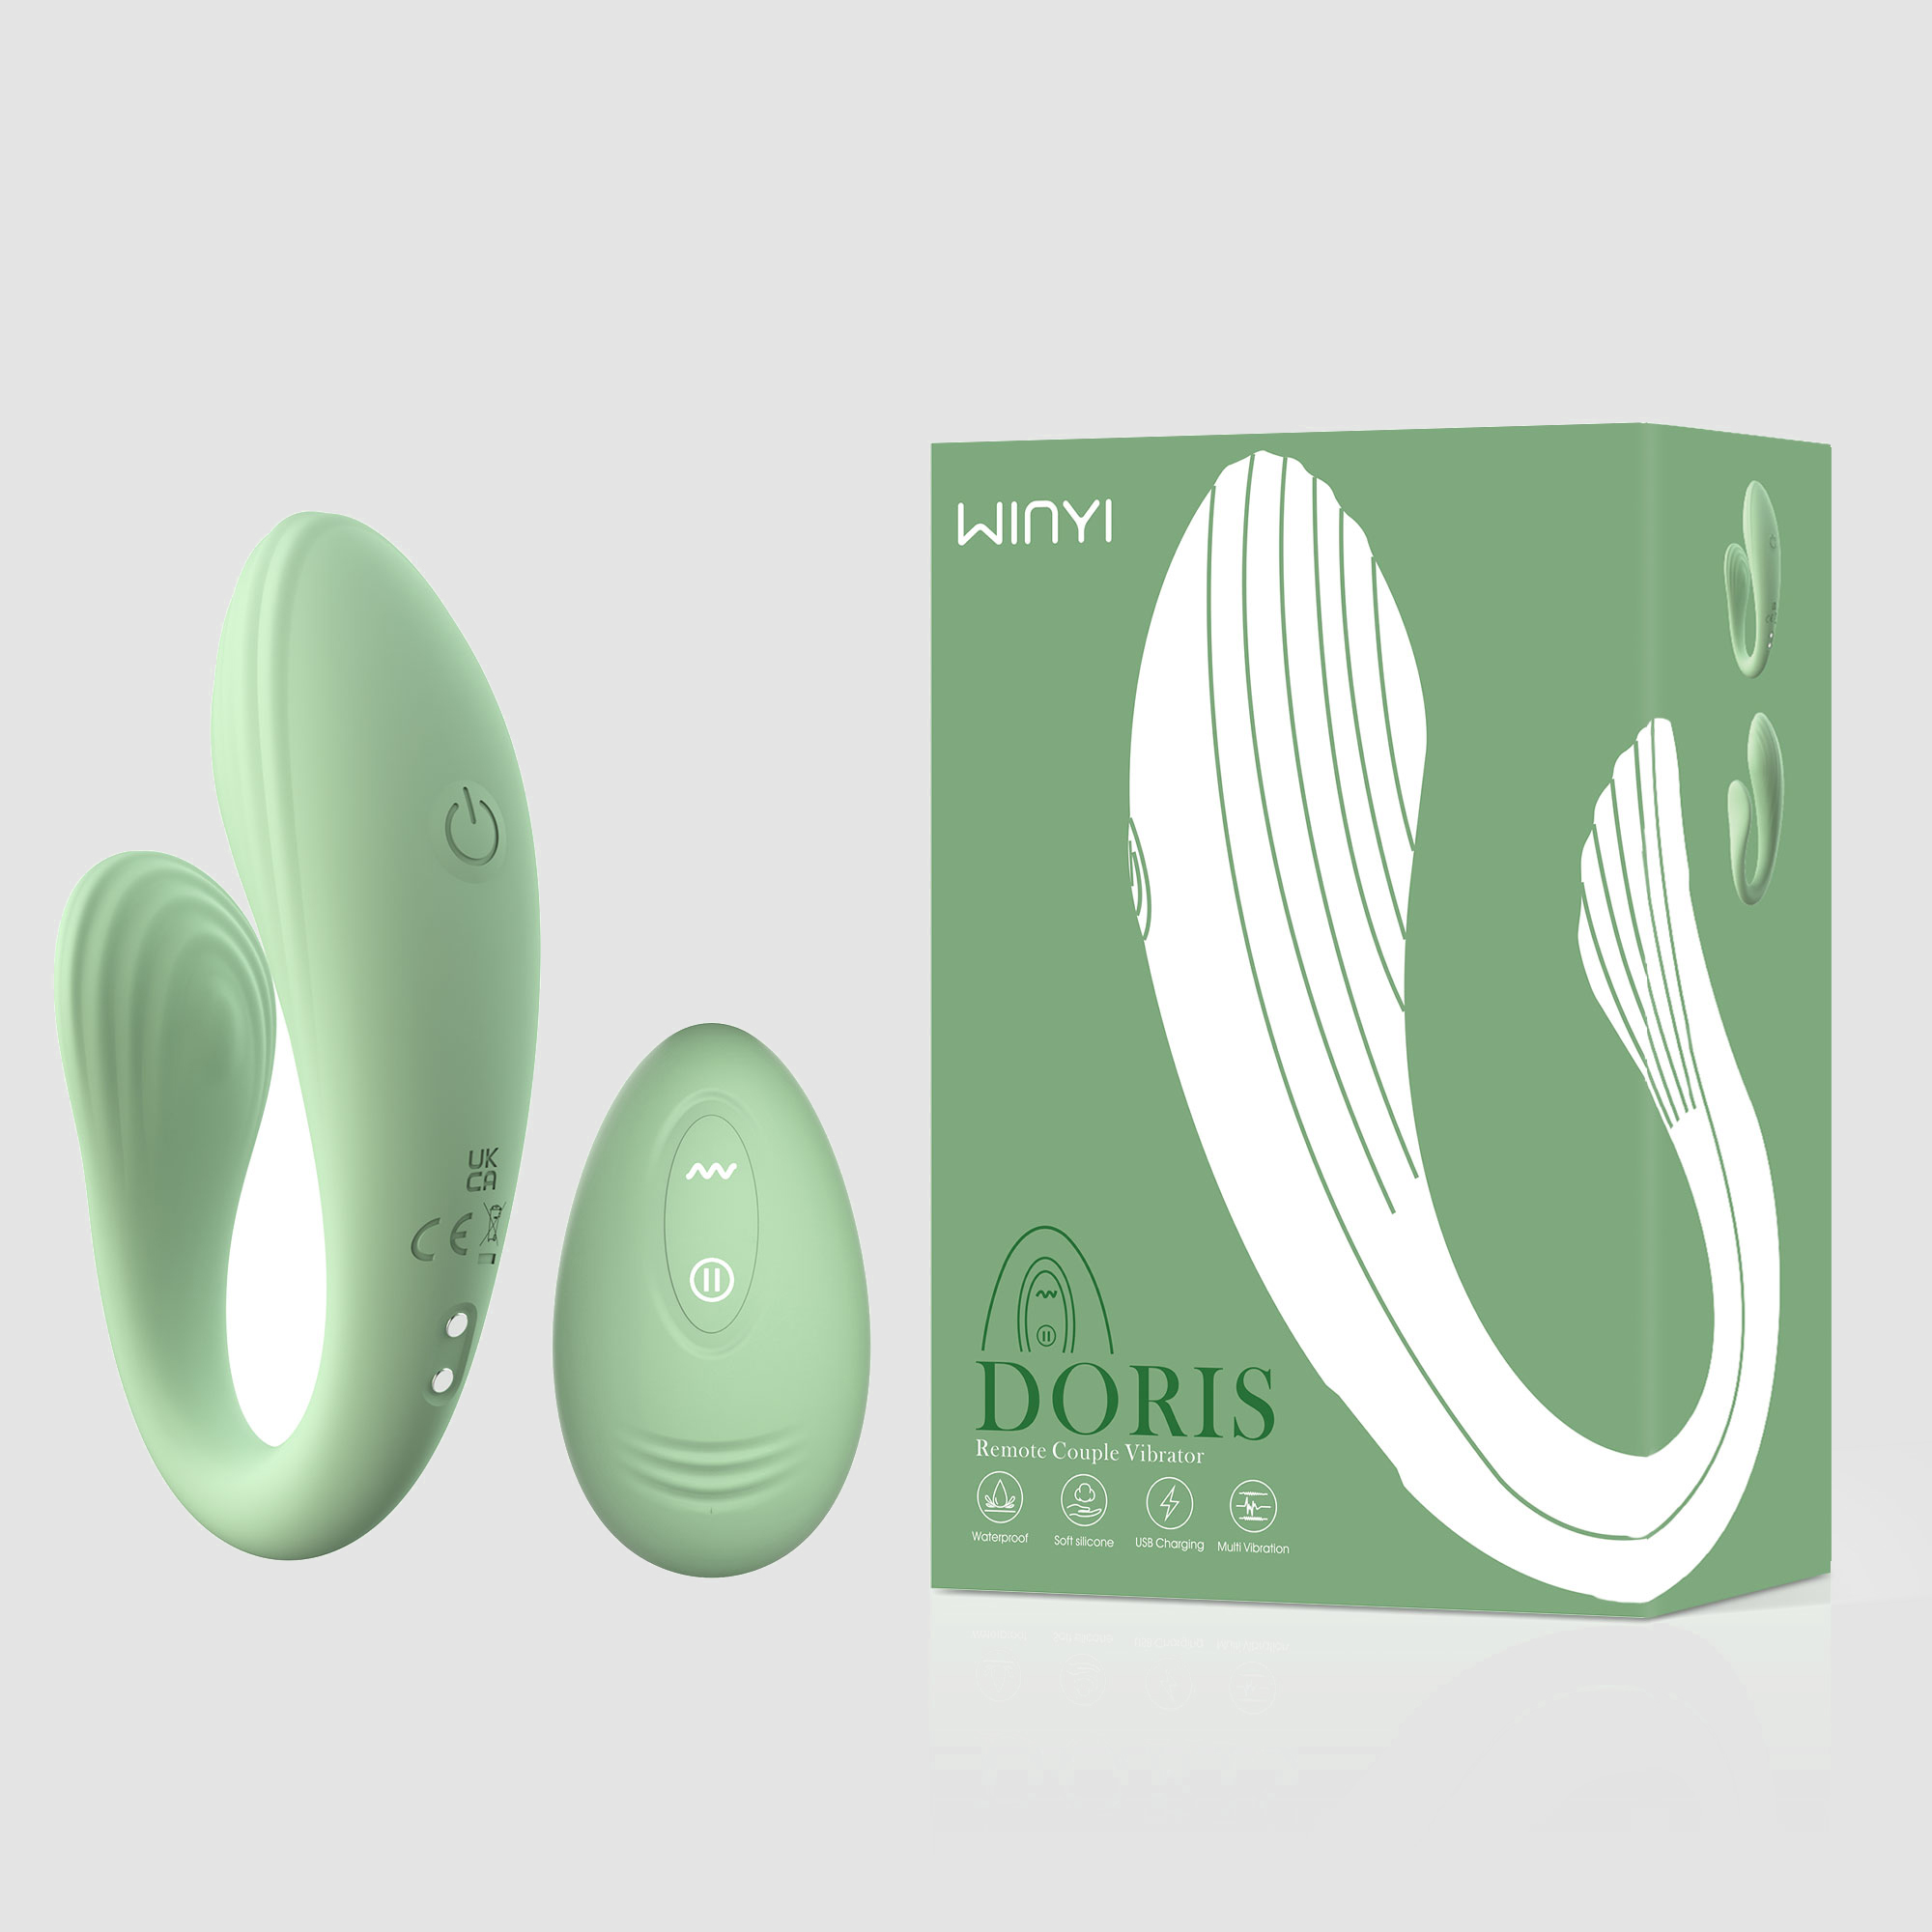 WINYI Wholesale Love Egg Bullet Vibrator Oem Liquid Silicone Usb Wireless Remote Control Sex Toy Clitoral Vibrator -manufacturer-OEM ODM service-customizied by design and samples-Supplier Assessment Procedures-Cooperated with big brands-Good Reputation Supplier-Overseas Service Support -Quality Control Experts Minor Customization Factory Direct Price